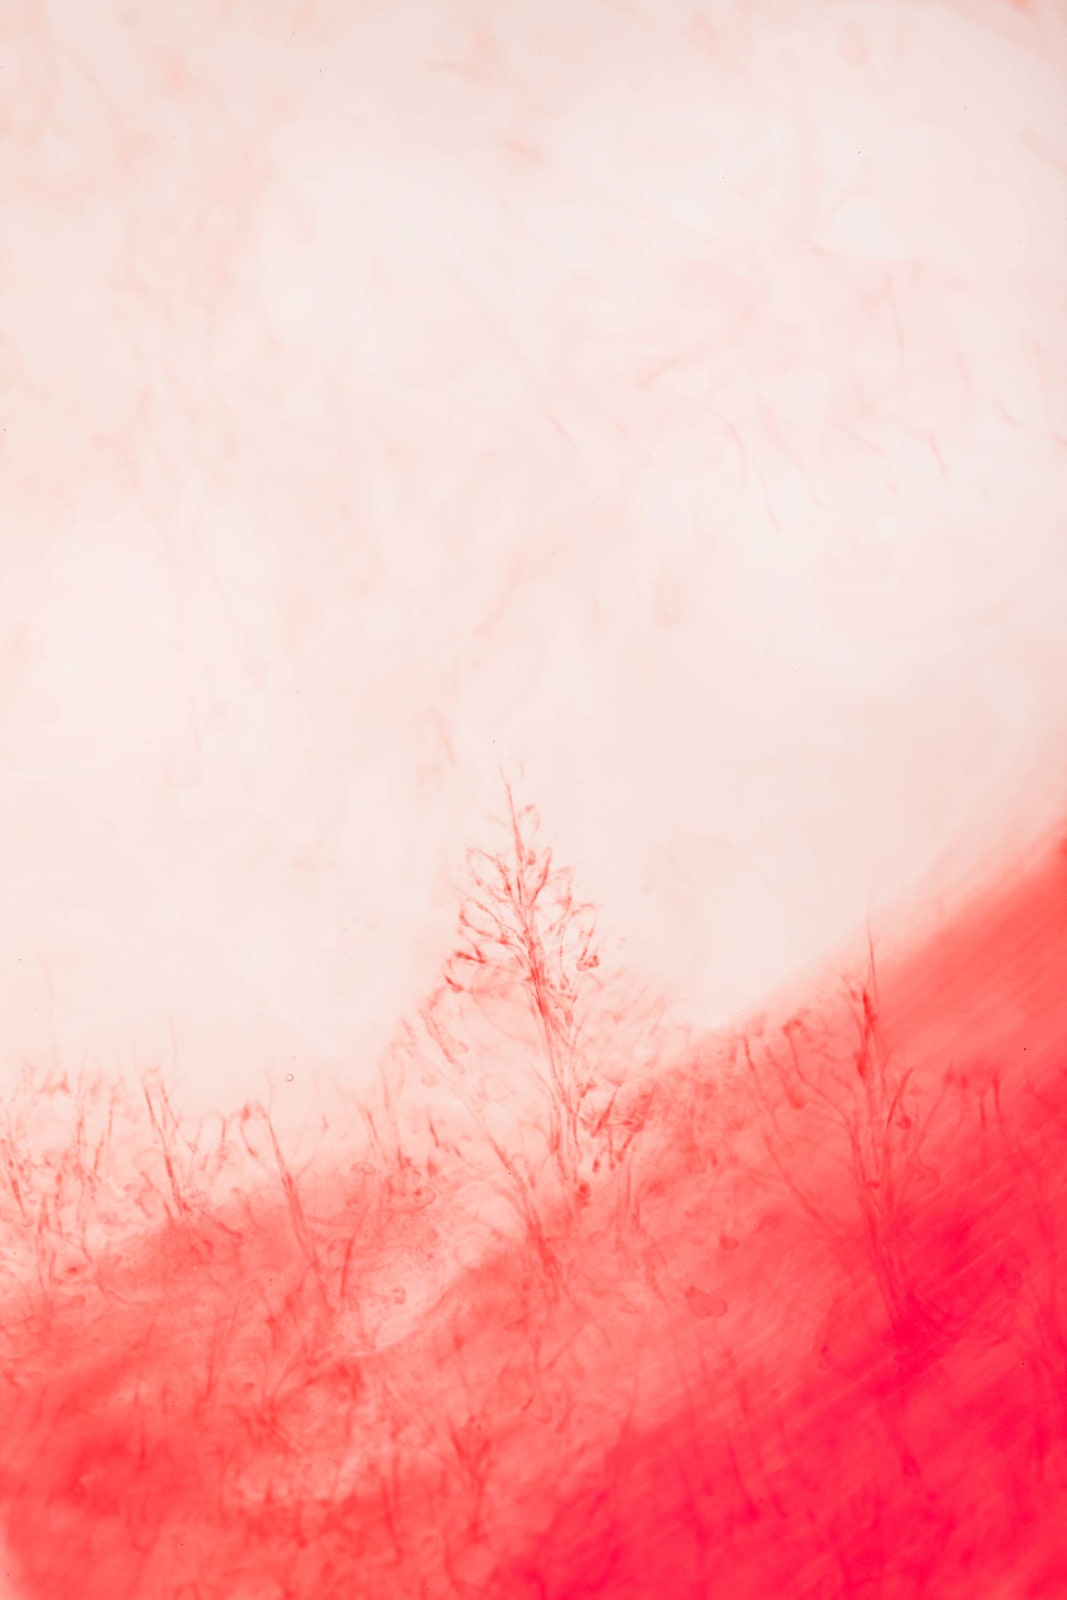 Elinor Carucci abstract photograph red and white